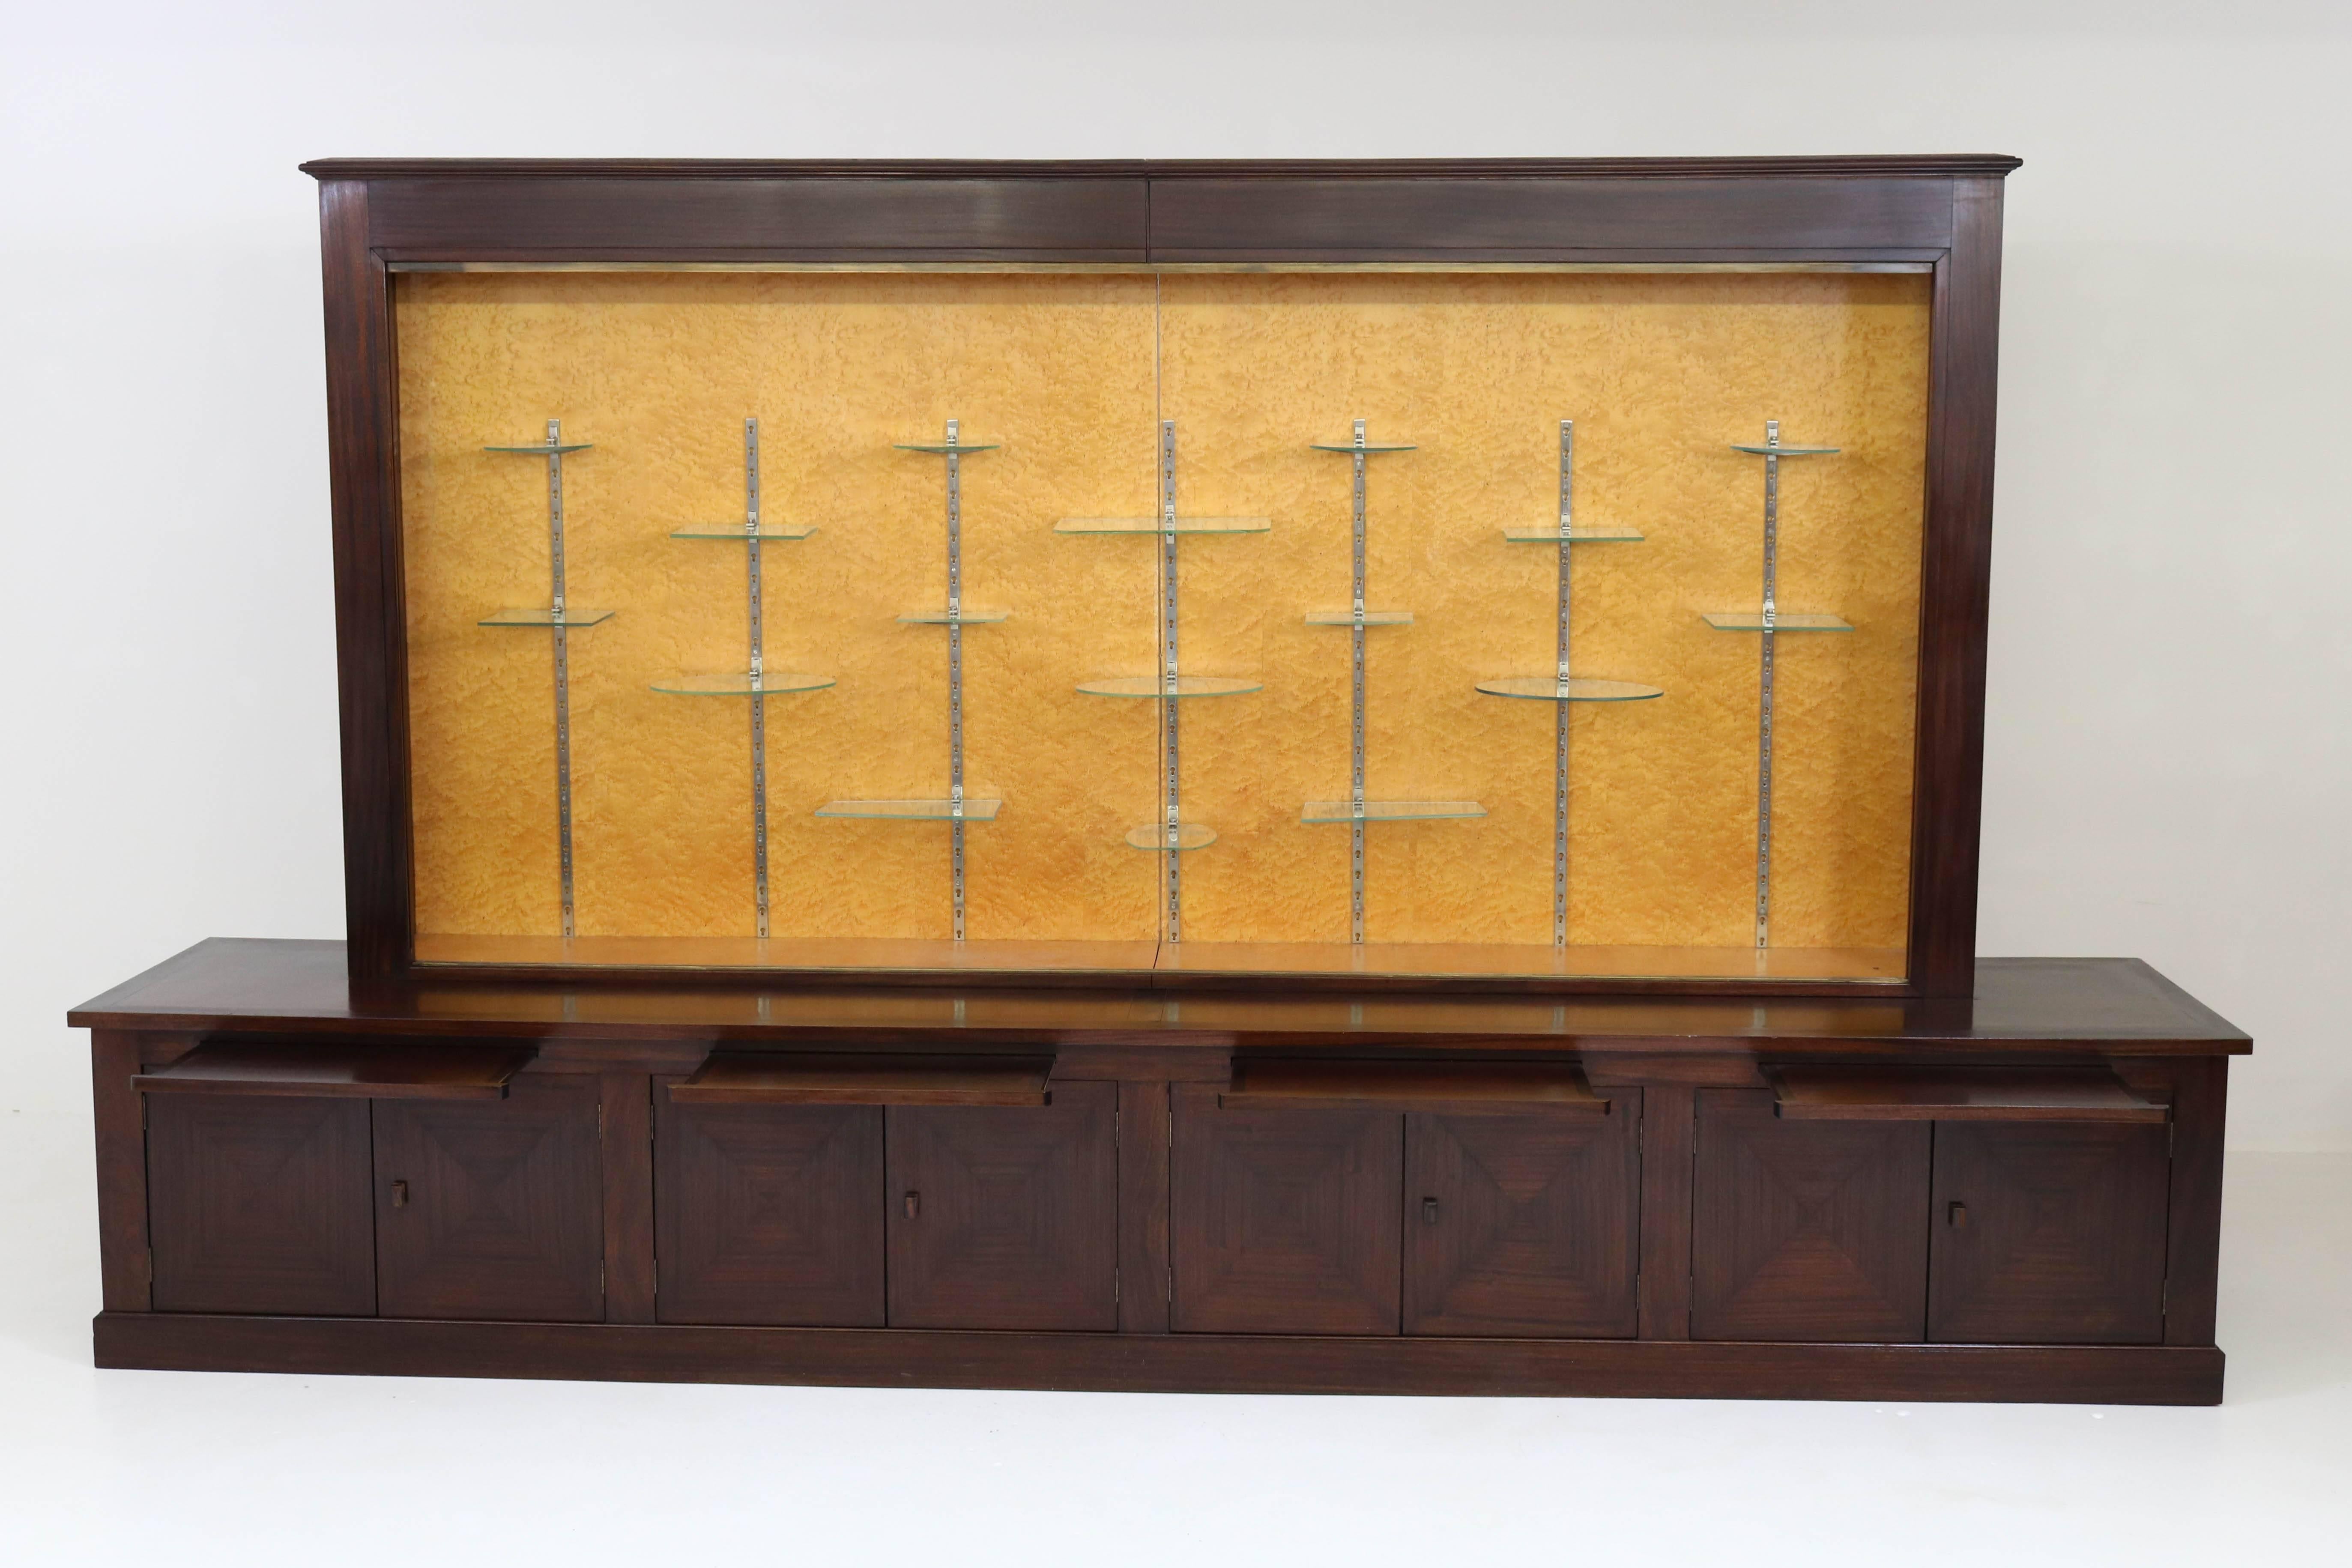 Very large and rare mahogany Art Deco Haagse School Vitrine with original glass sliding doors, 1920s.
This vitrine can be transported into two pieces.
Solid Macassar ebony handles on the doors.
Original glass shelves and nickel-plated brass